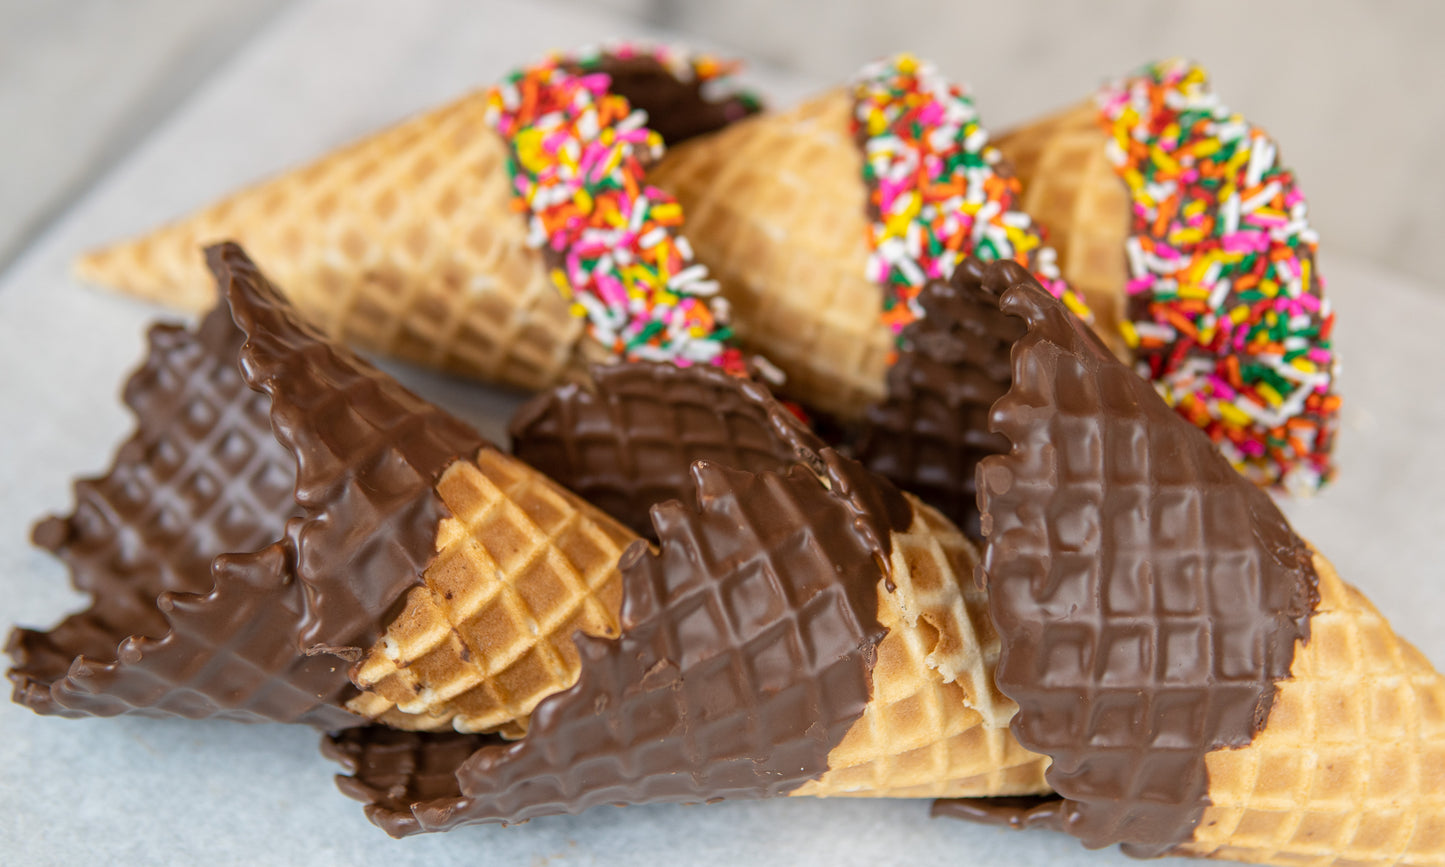 Decorated Home Made Waffle Cones